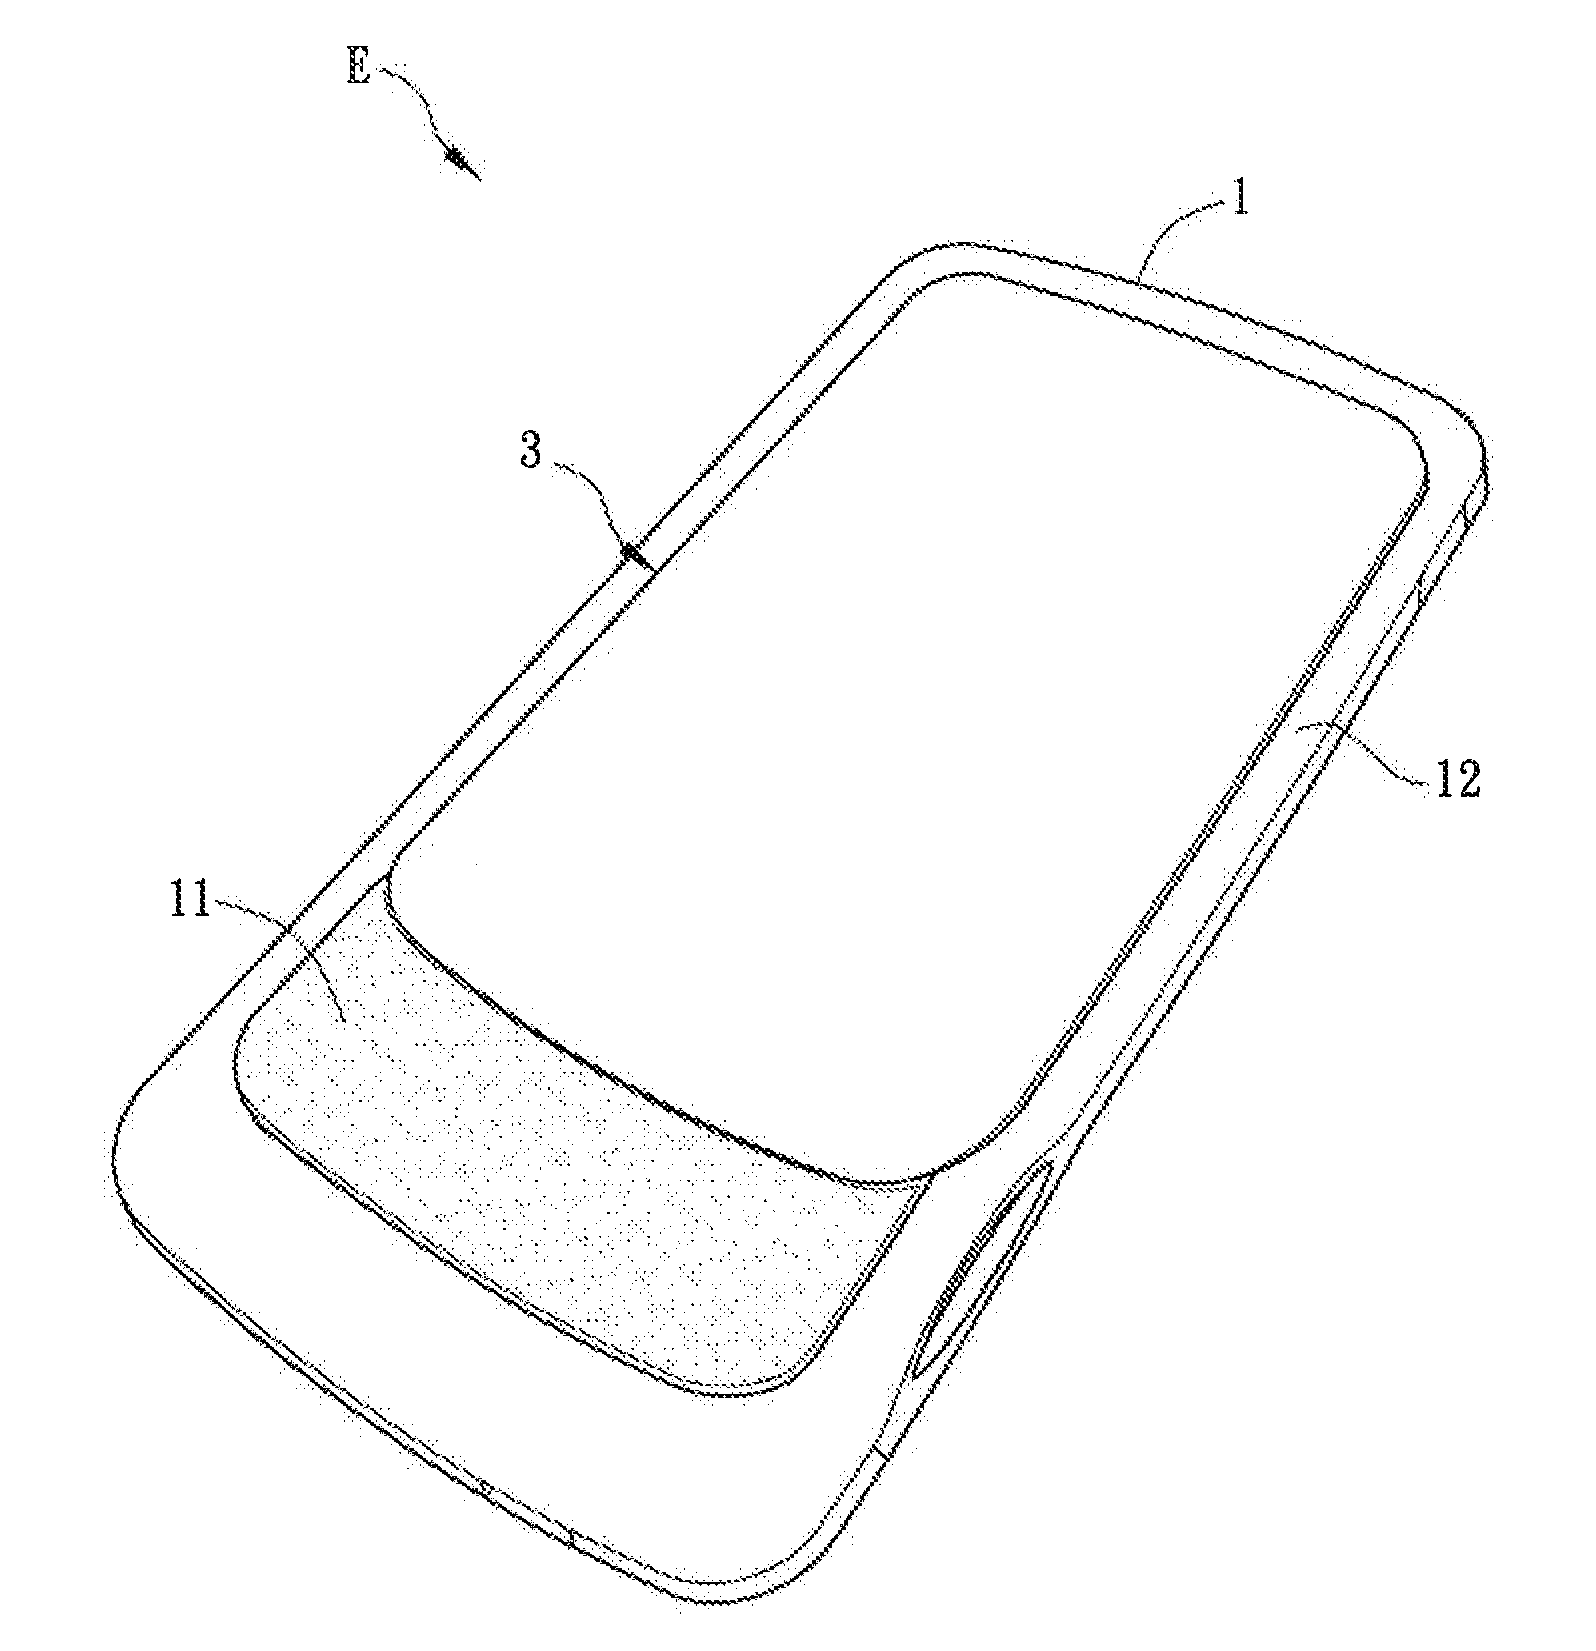 Portable electronic device